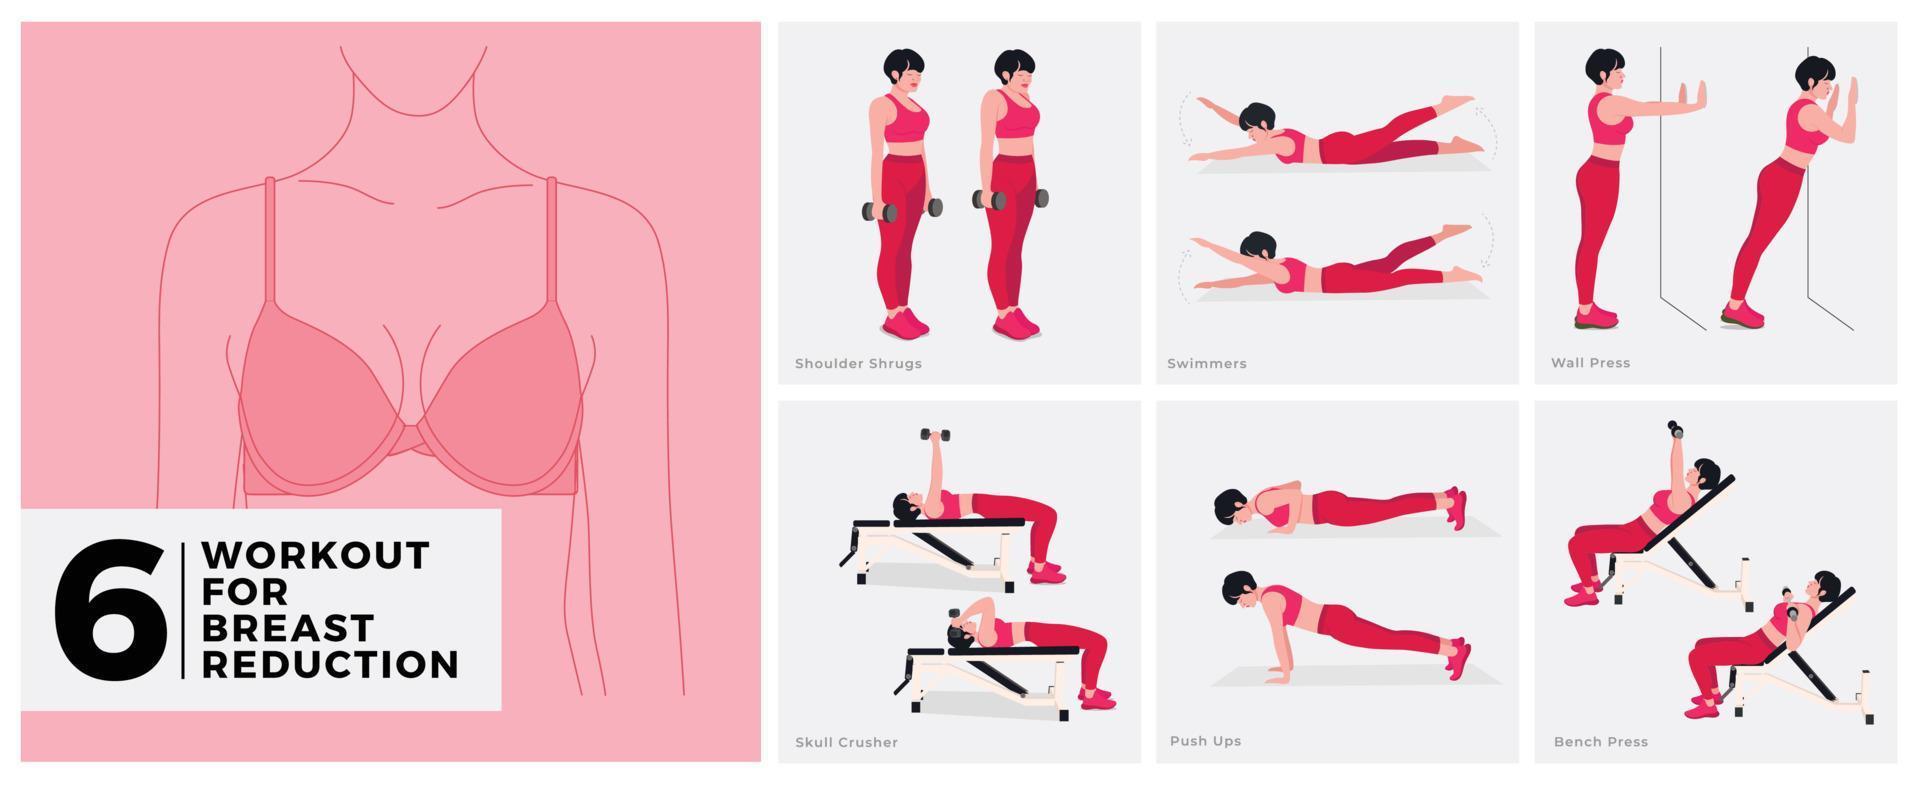 Workout exercises for BREAST REDUCTION. Women doing fitness and yoga exercises. vector